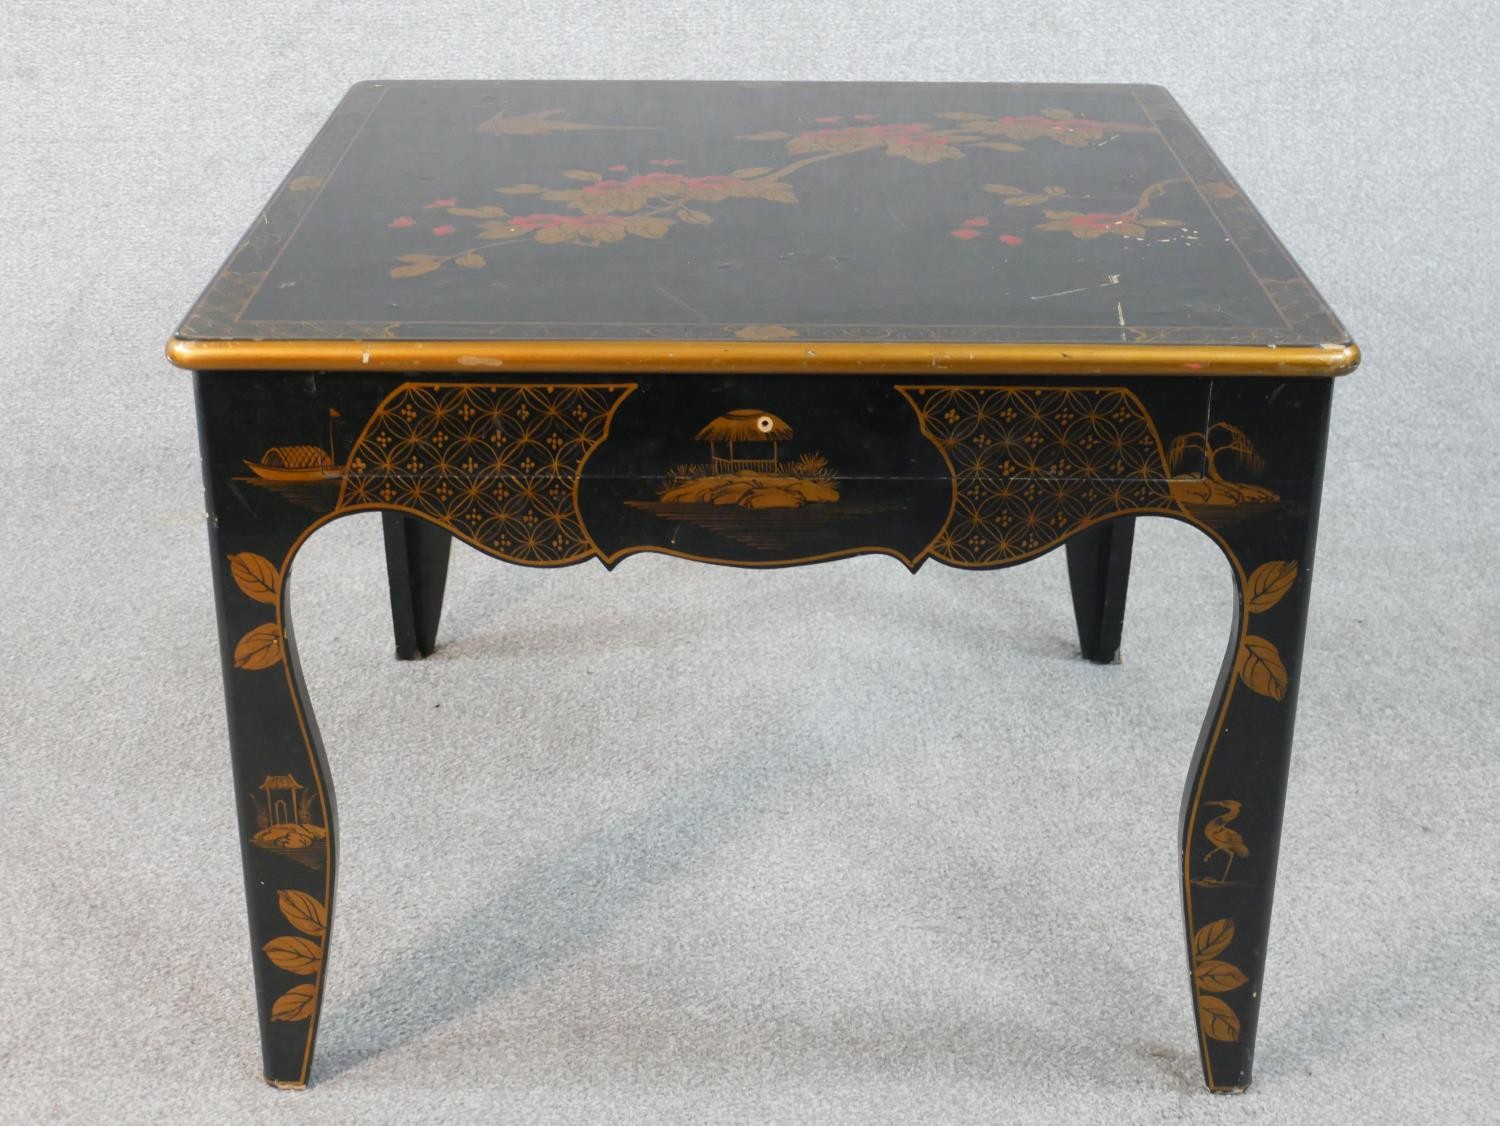 A black lacquered Chinese low table with hand gilded bird and blossom decoration. W.66 H.52 D.66cm